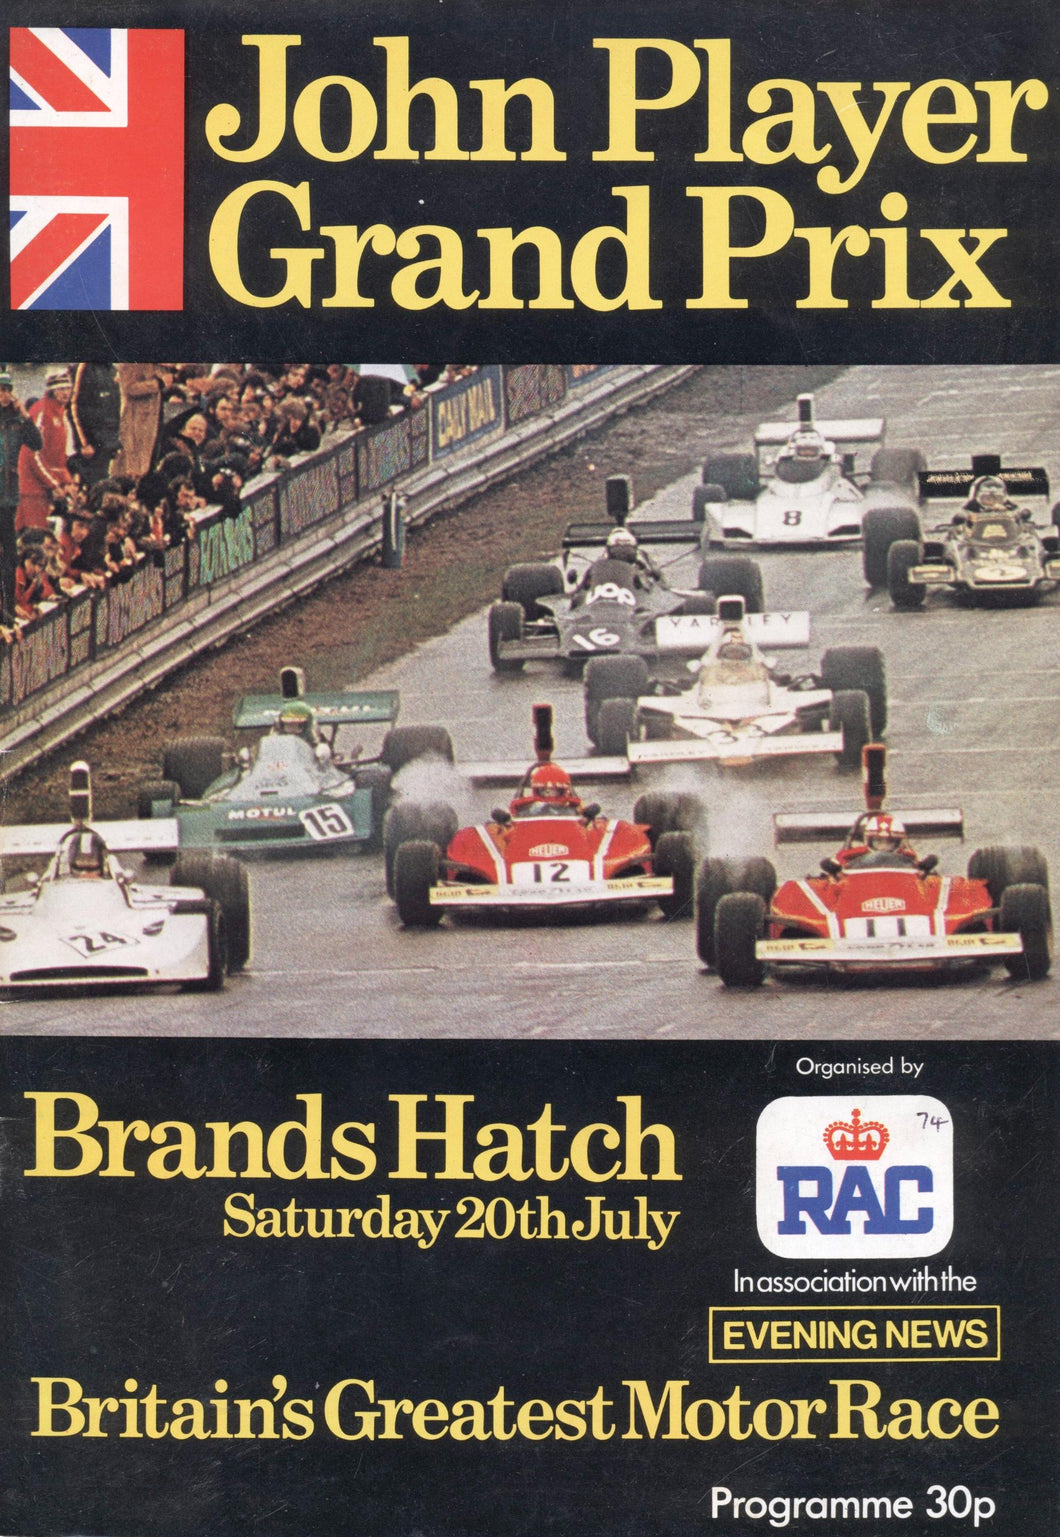 John Player Grand Prix Official Programme, Brands Hatch, 20th July 1974 [Unknown Binding]